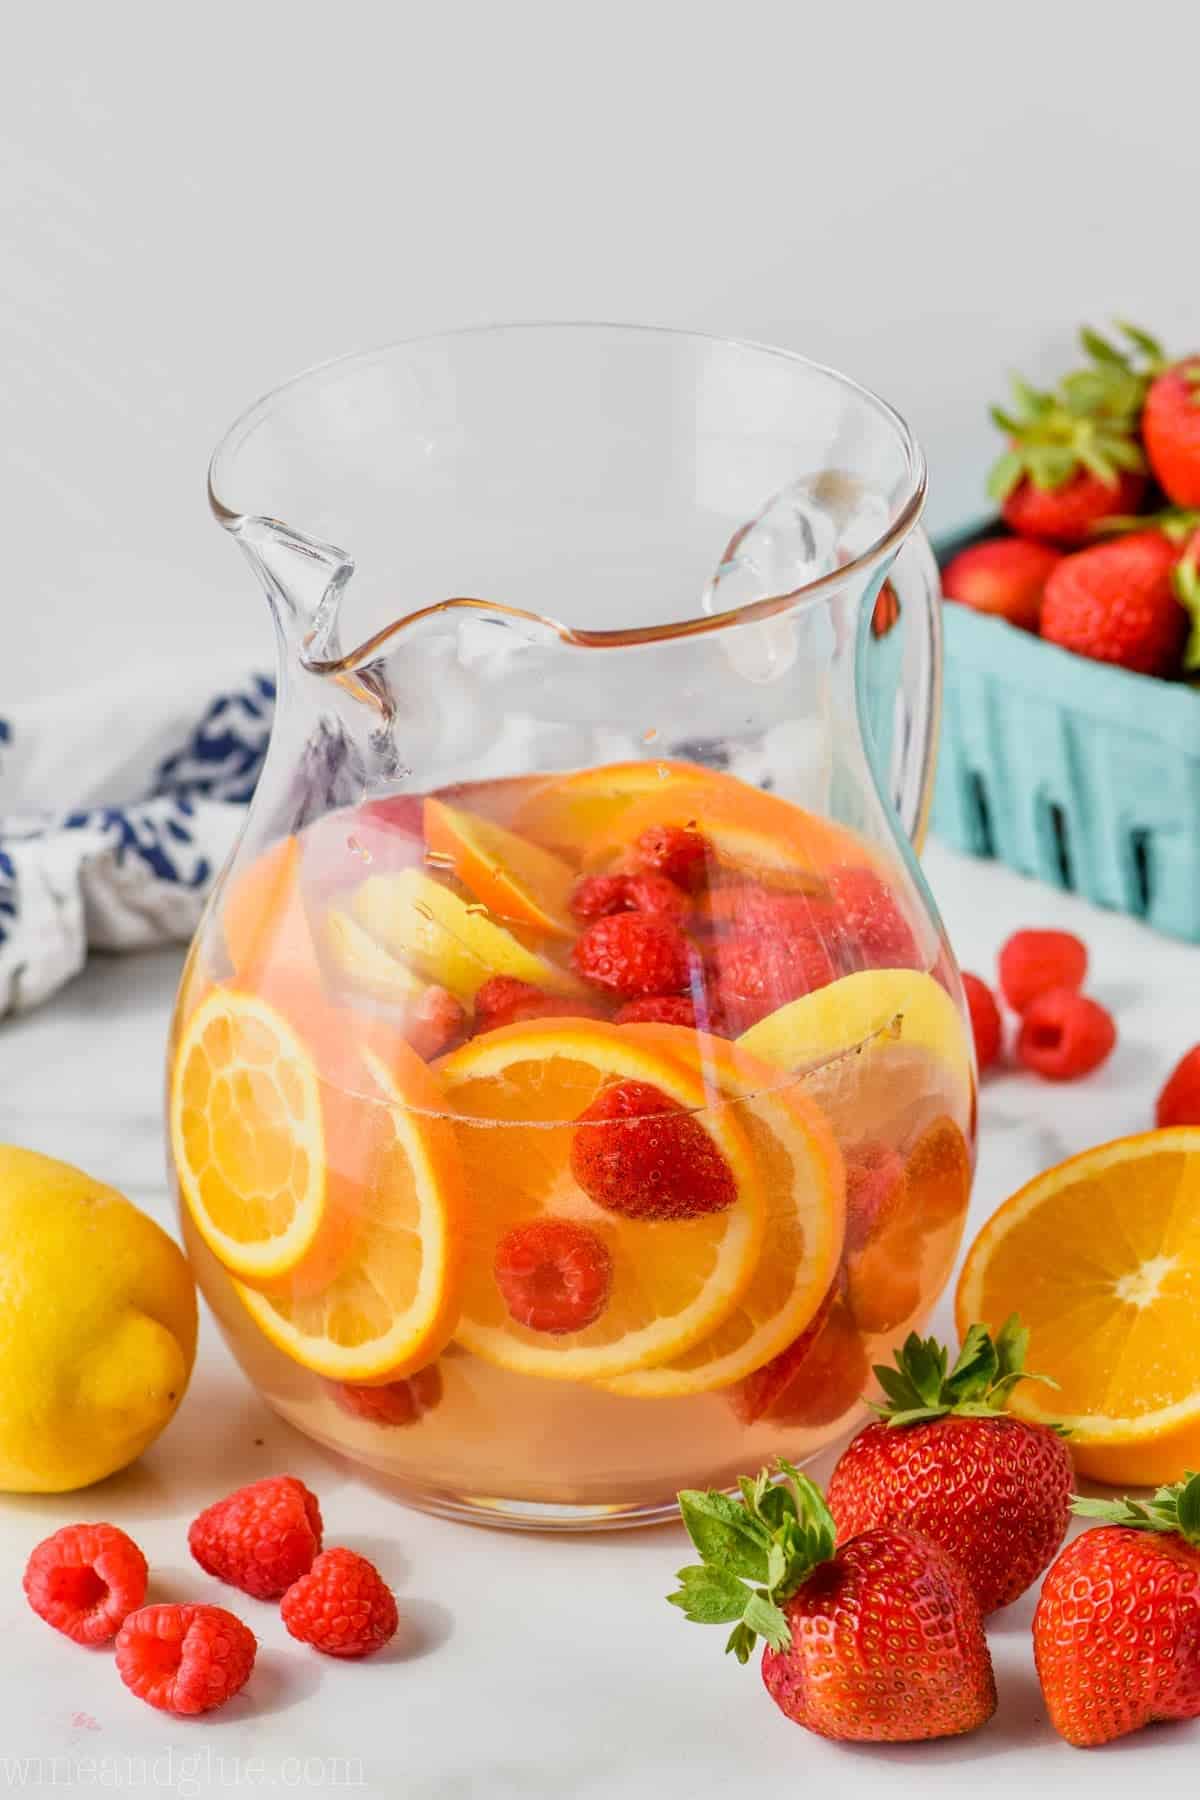 sangria recipe with vodka and white wine - Arlean Coon